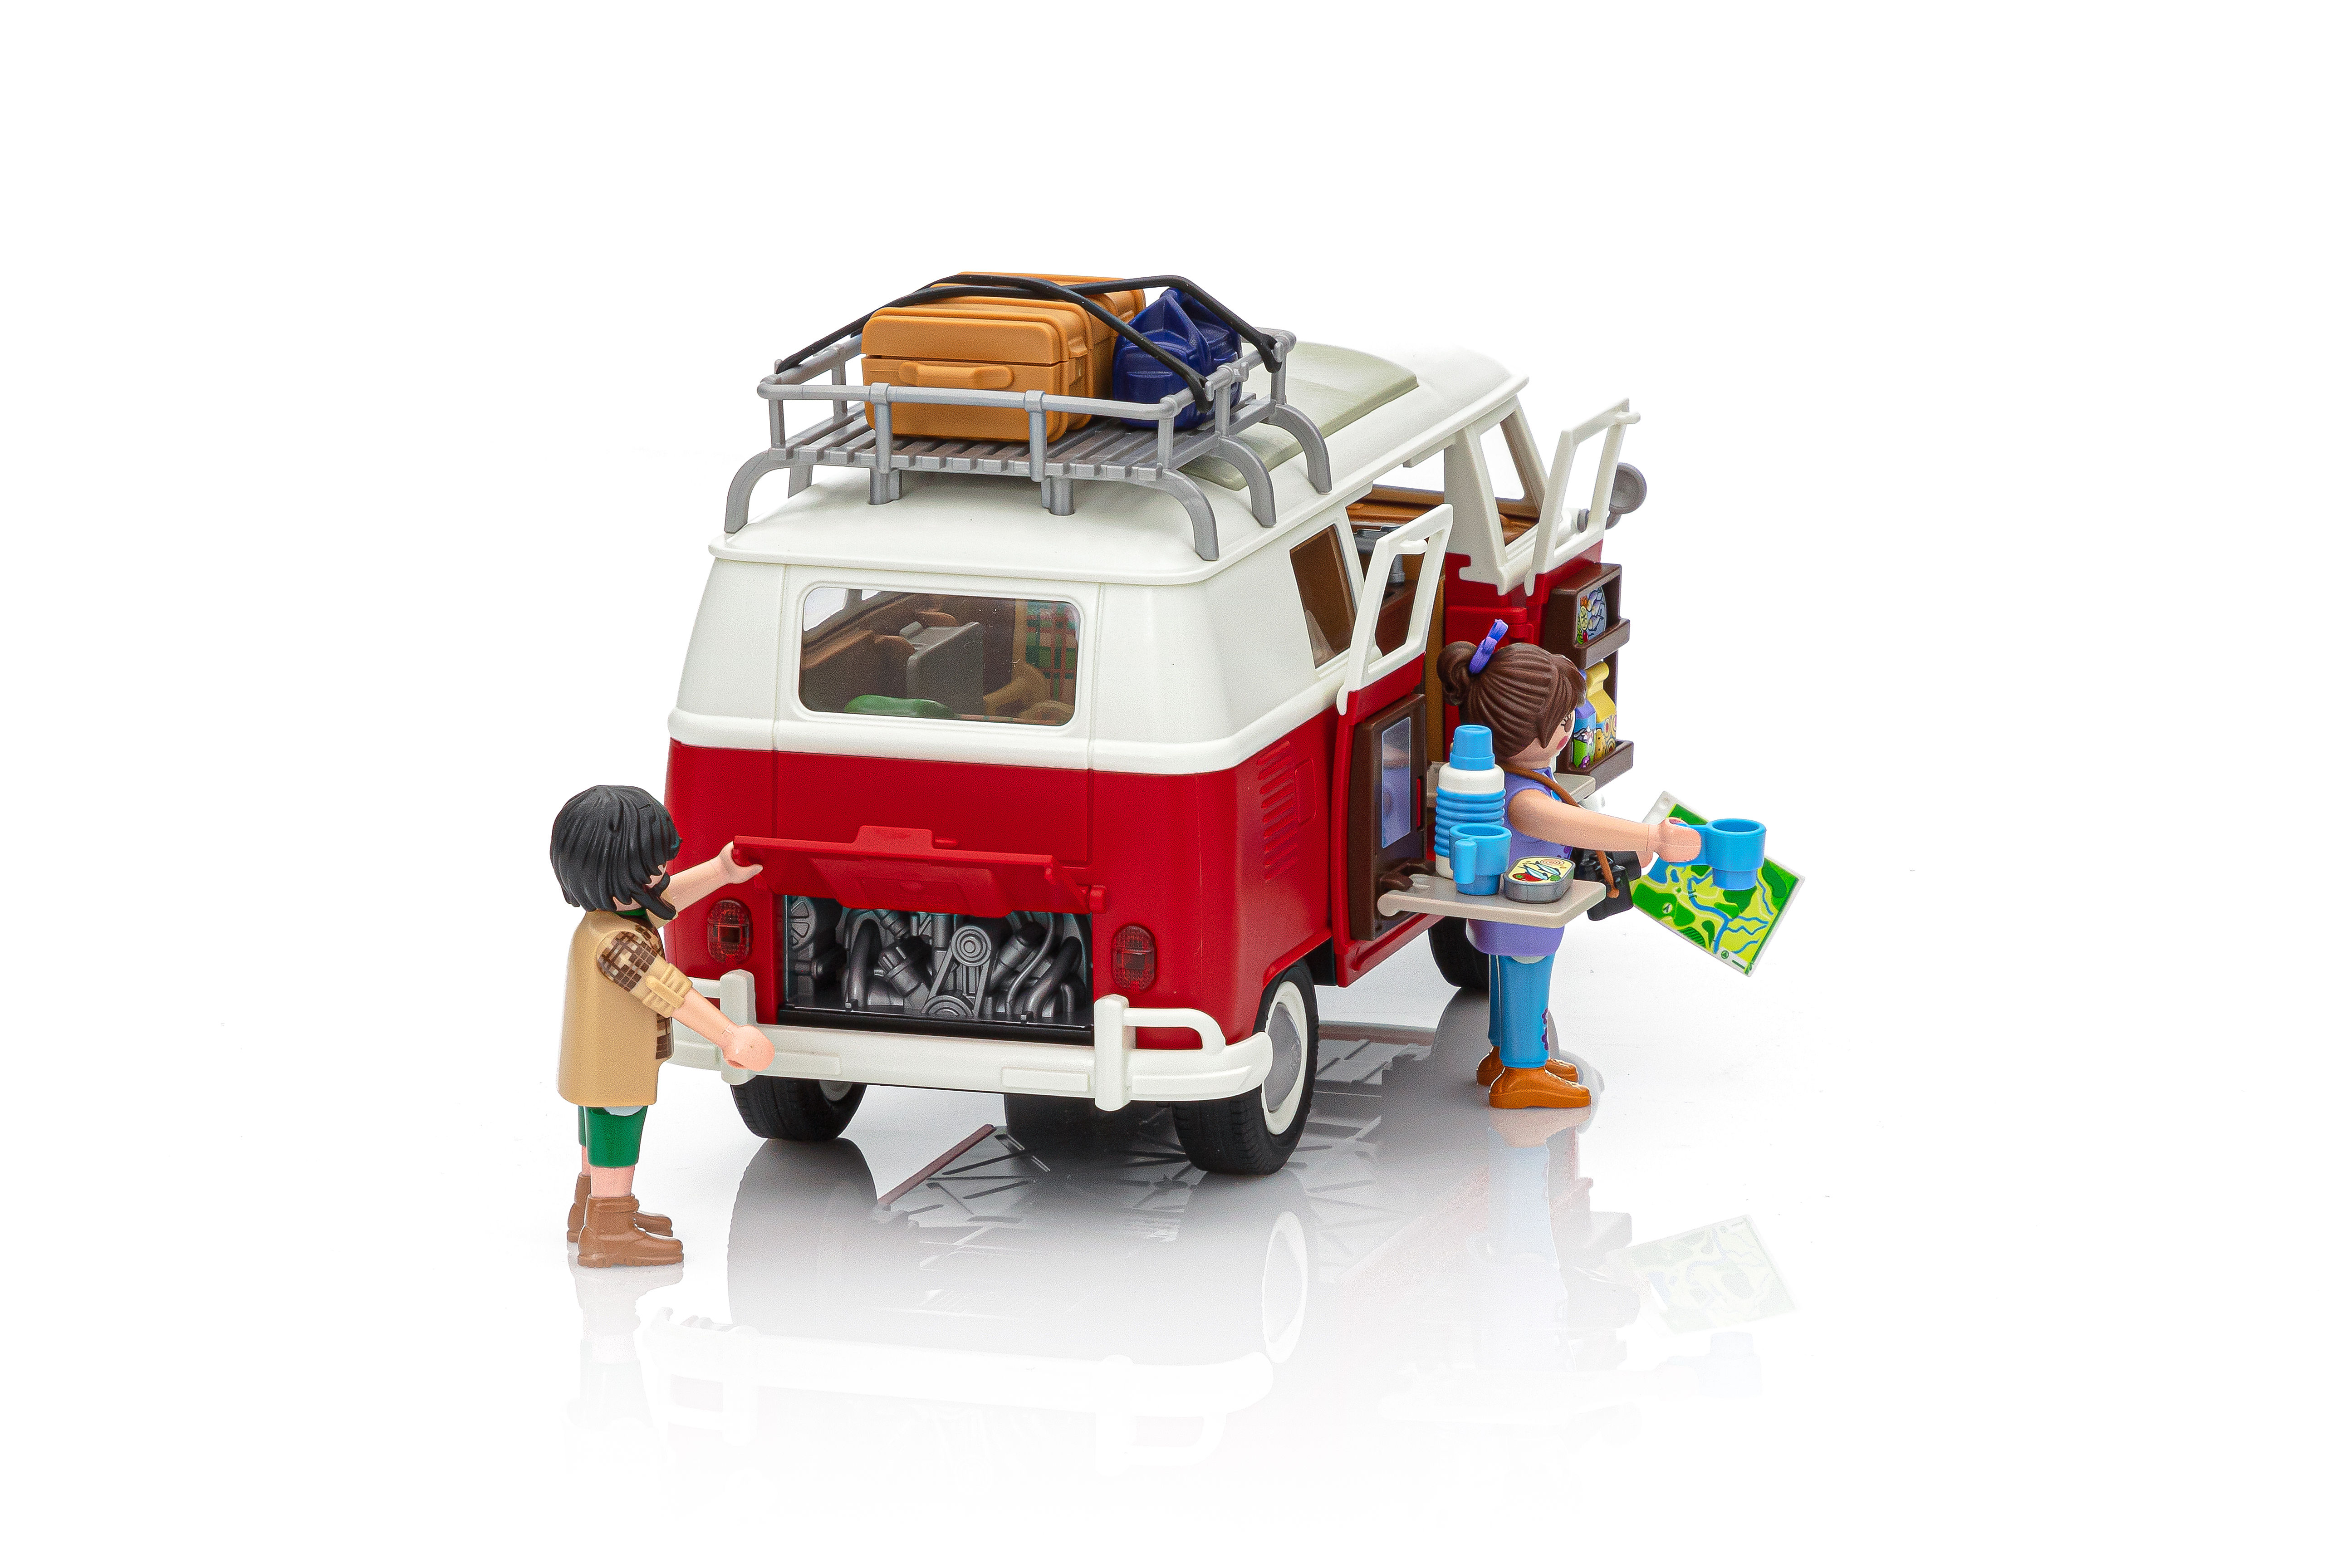 Plastic VW Bandwagon: We Build Playmobil's Beetle and T1 Camping Bus